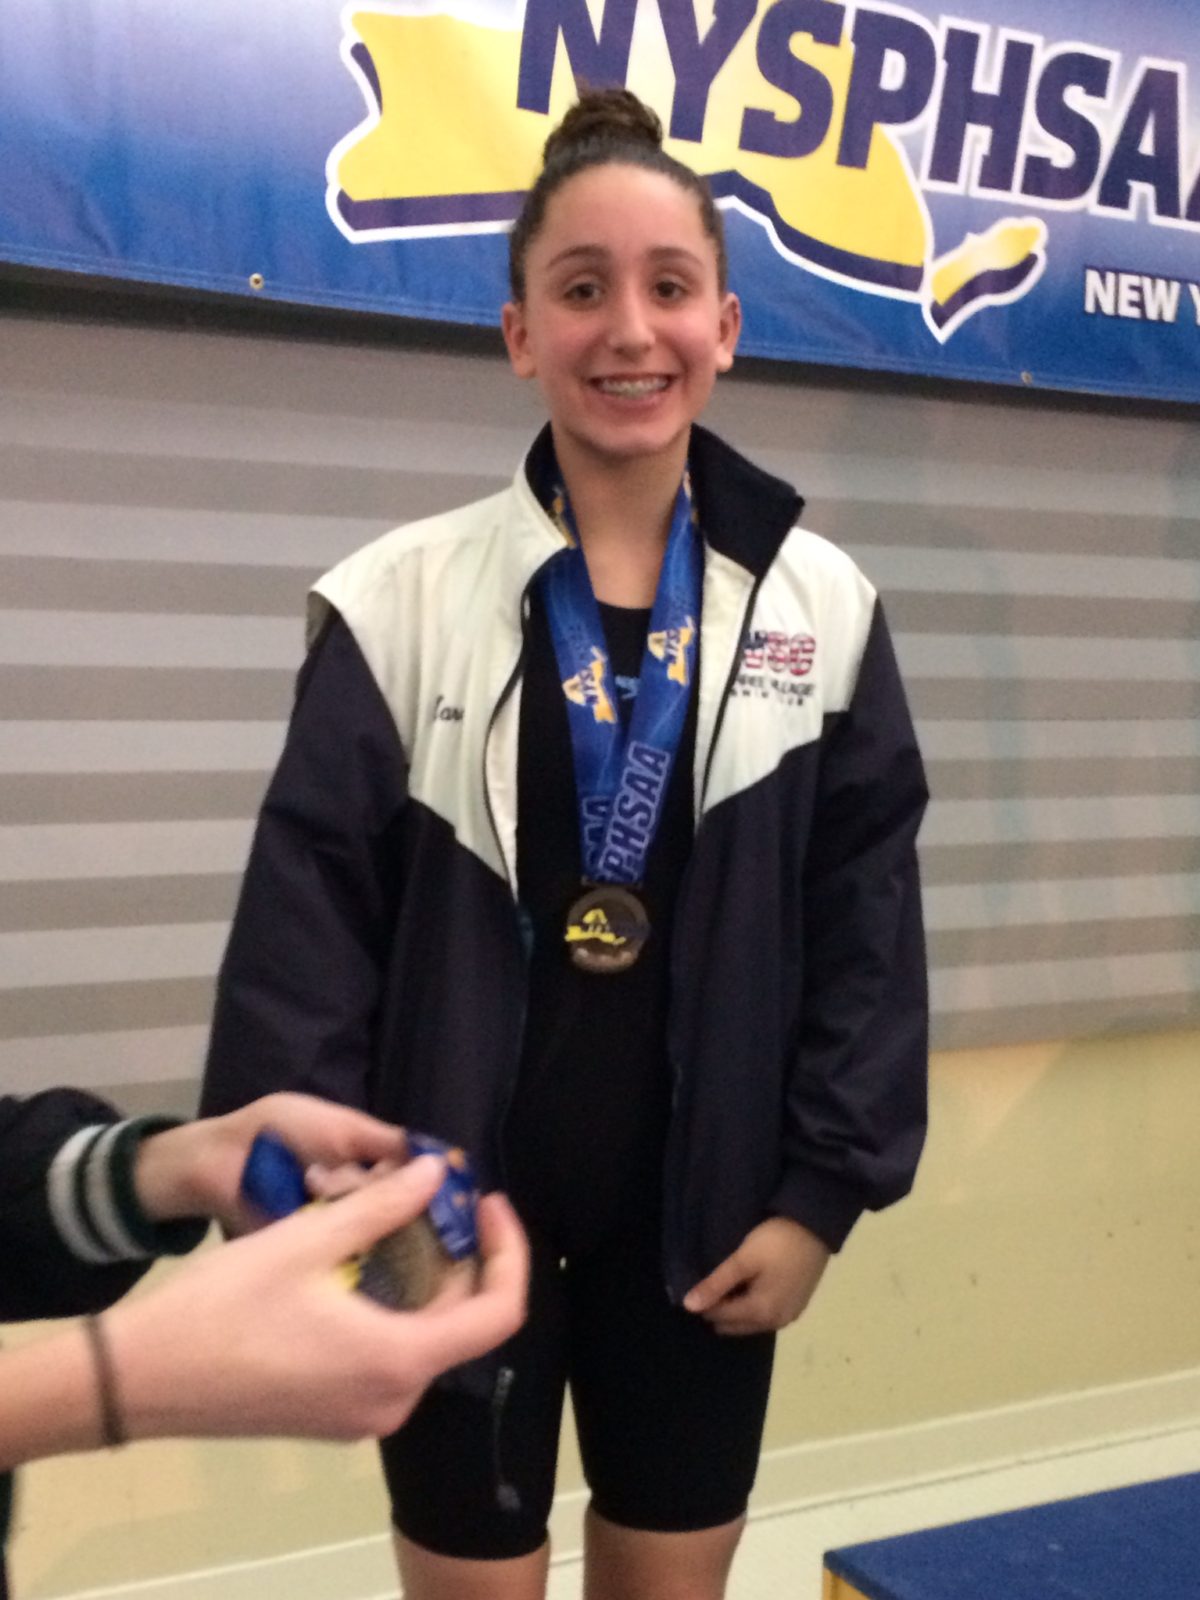 Miller Place Student Competes at NYSPHSAA Swim Championship